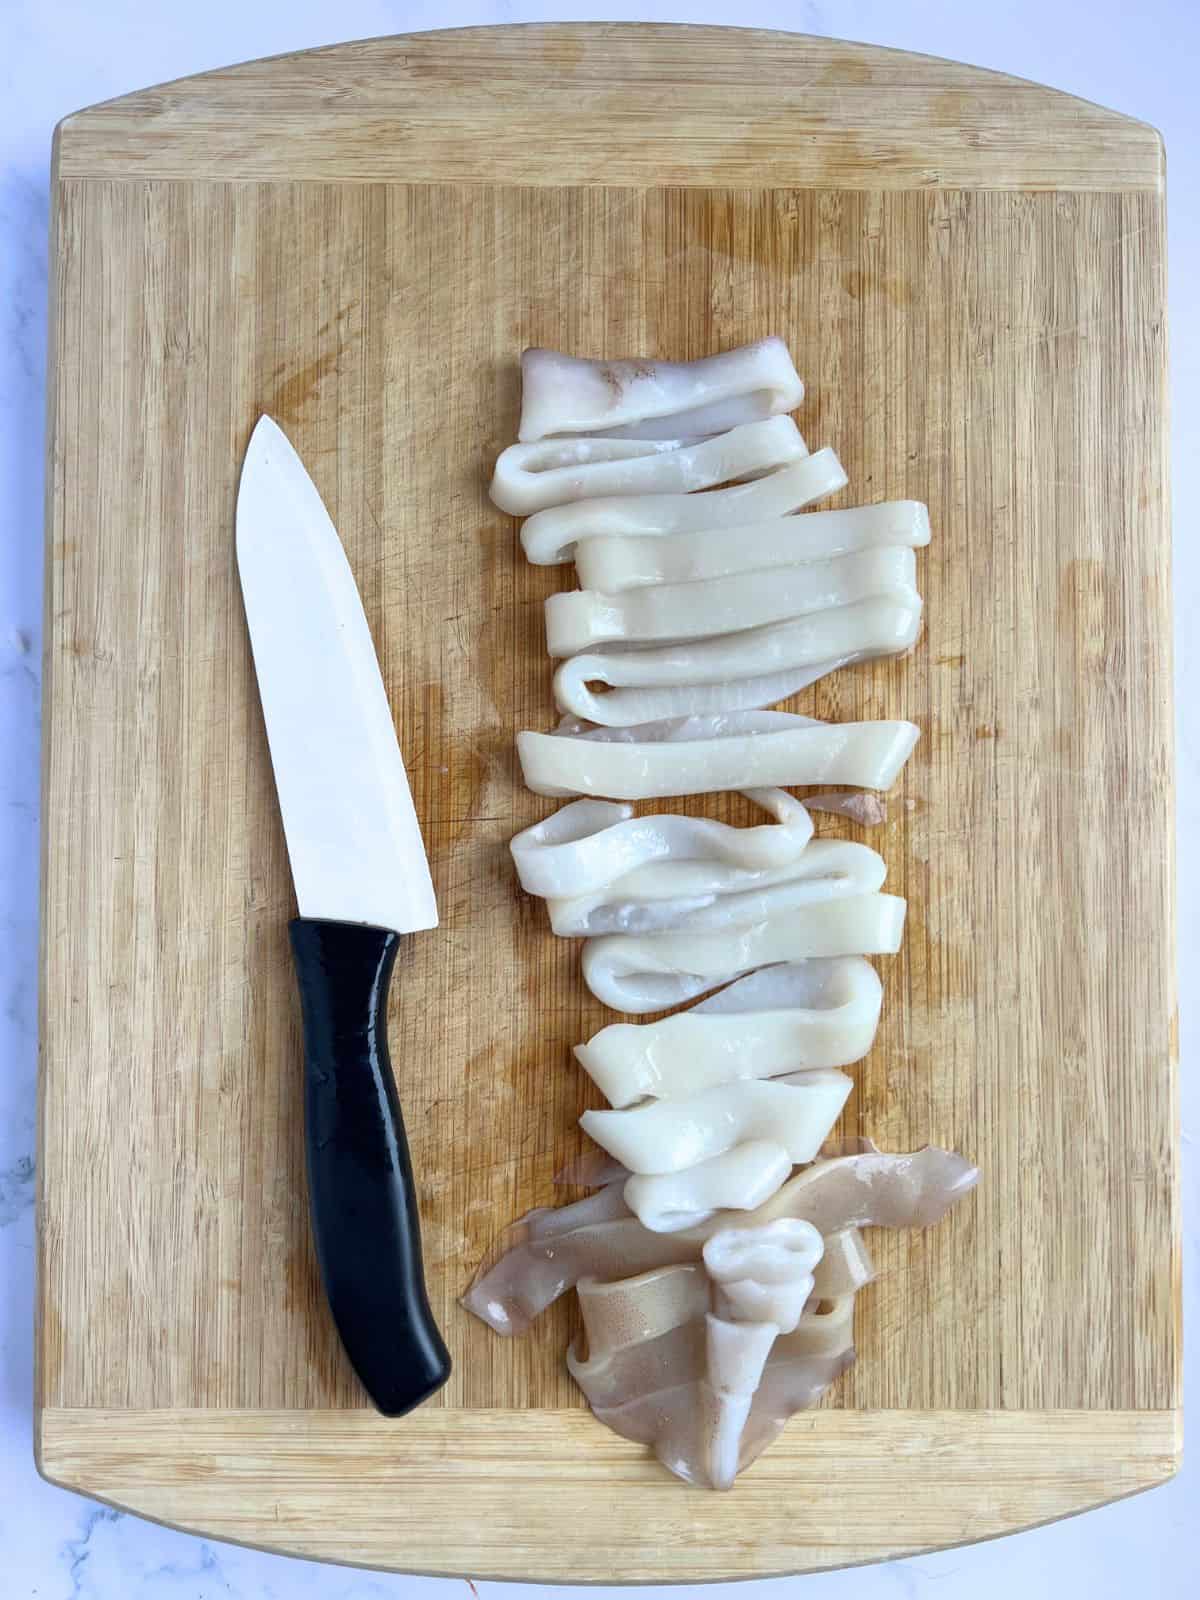 Clean and sliced squid on a chopping board